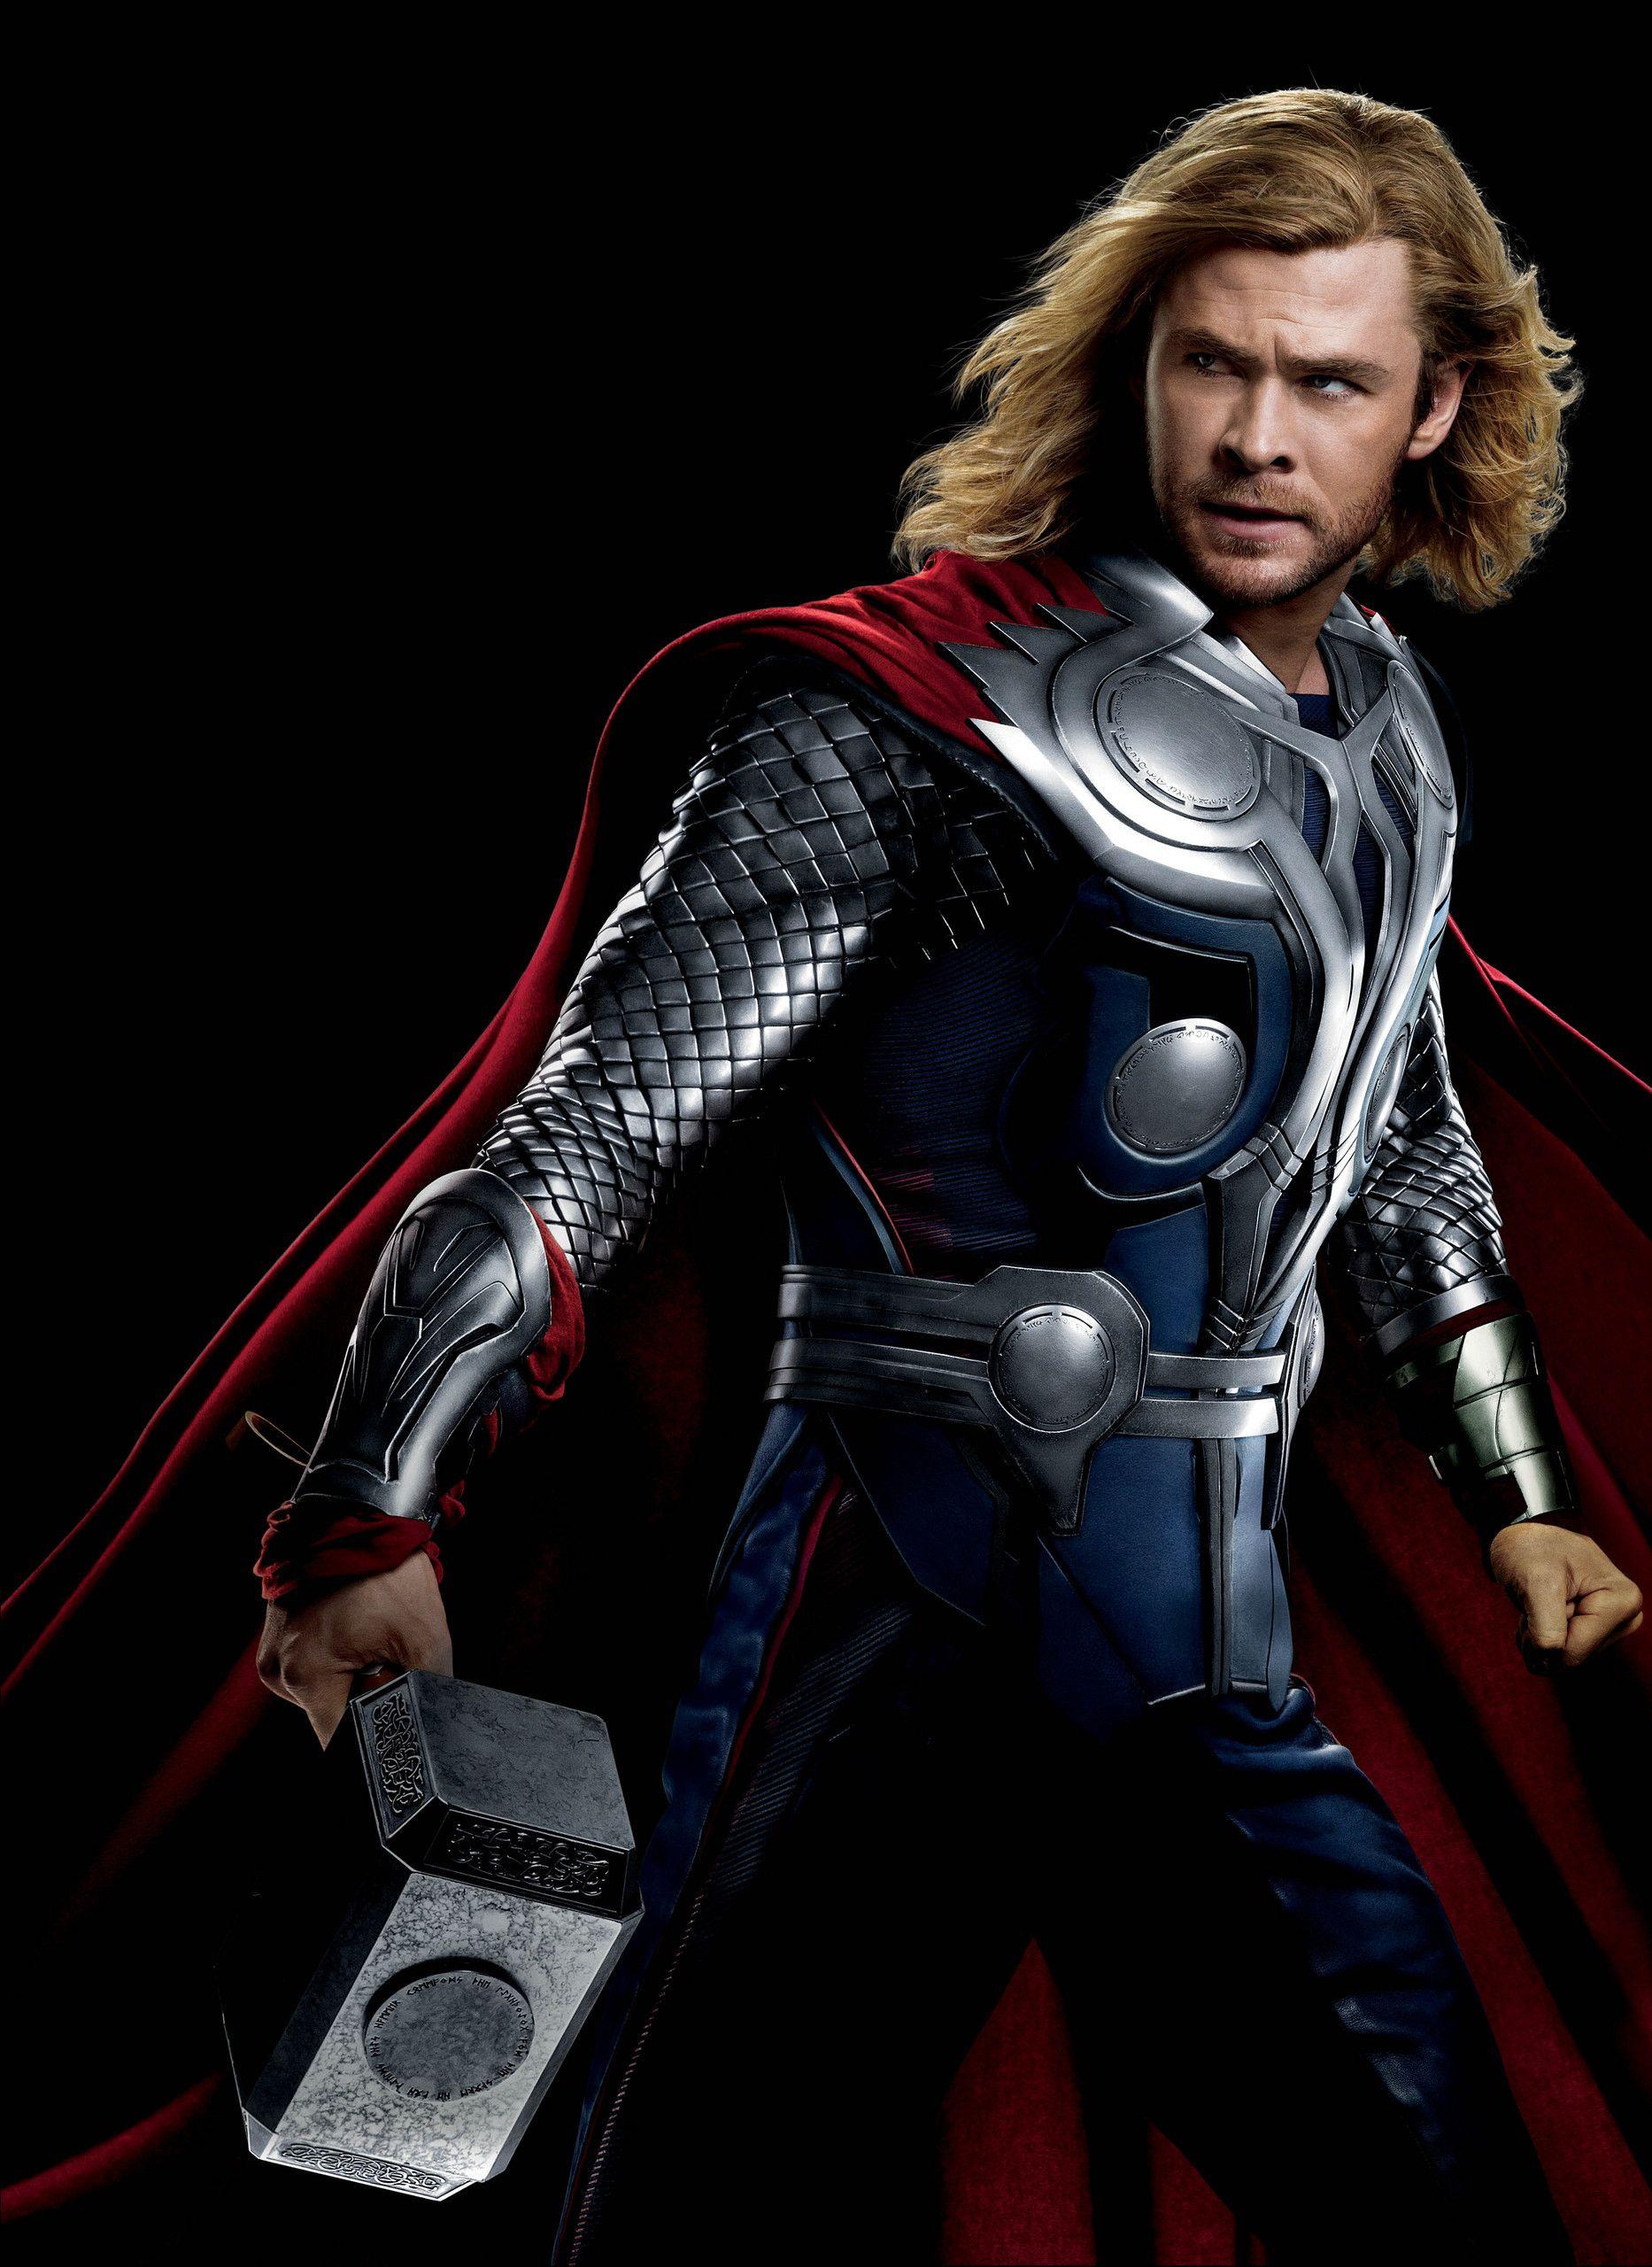 Thor Avengers - Best htc one wallpapers, free and easy to download | Thor  wallpaper, Thor, Avengers wallpaper